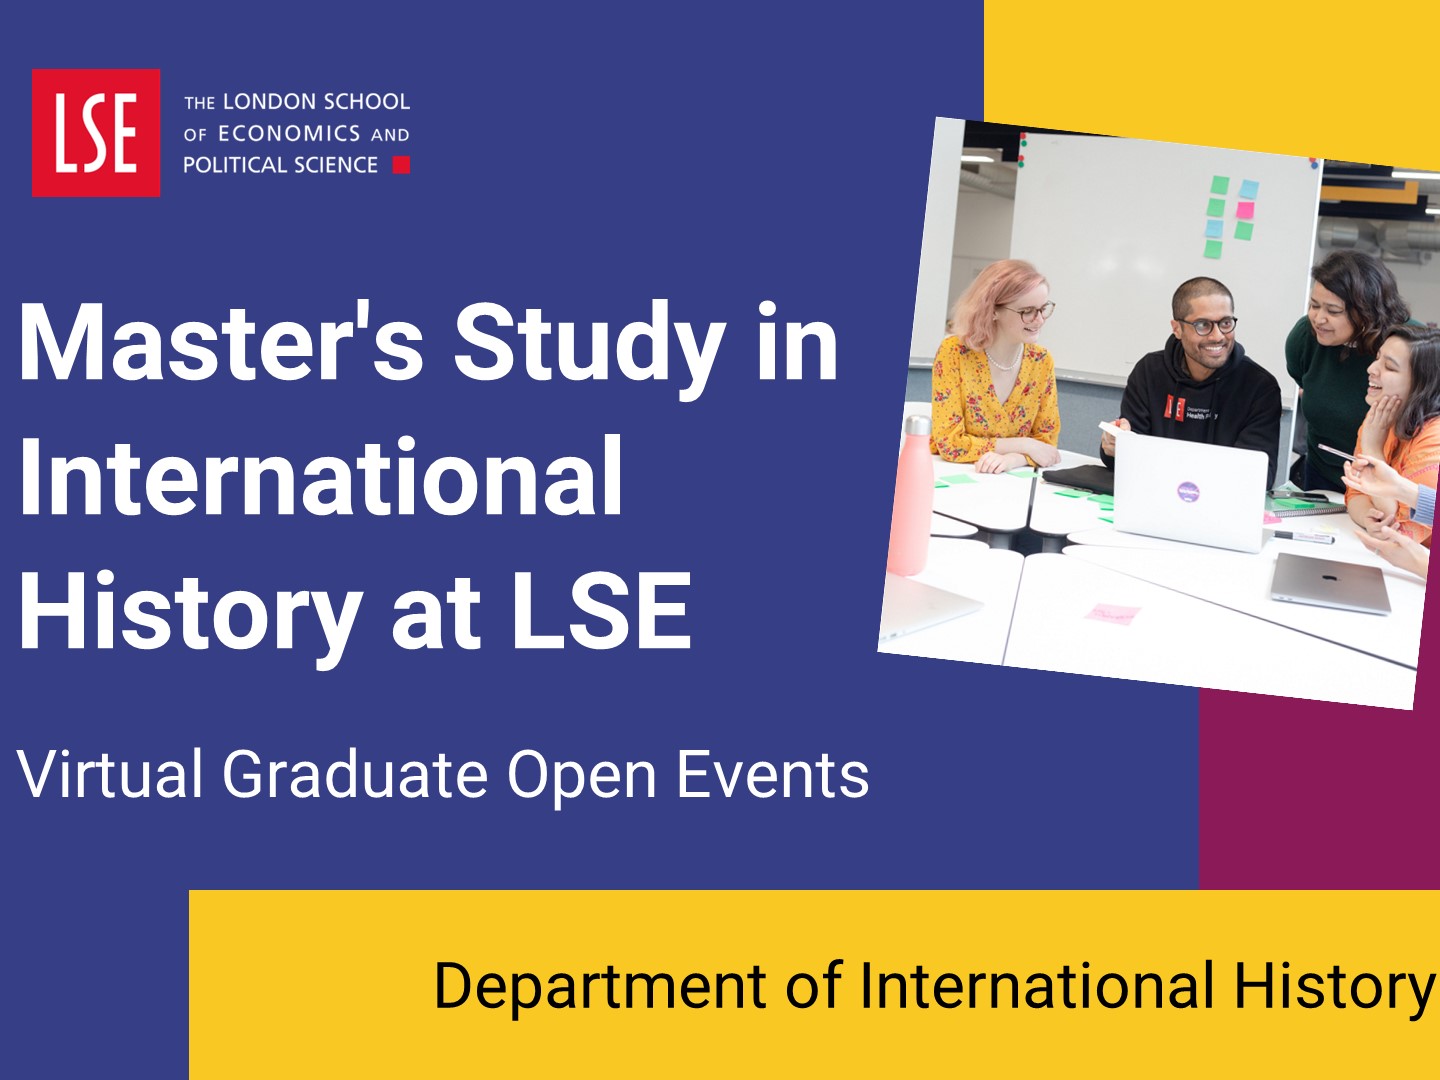 Introduction to master's study in International History at LSE